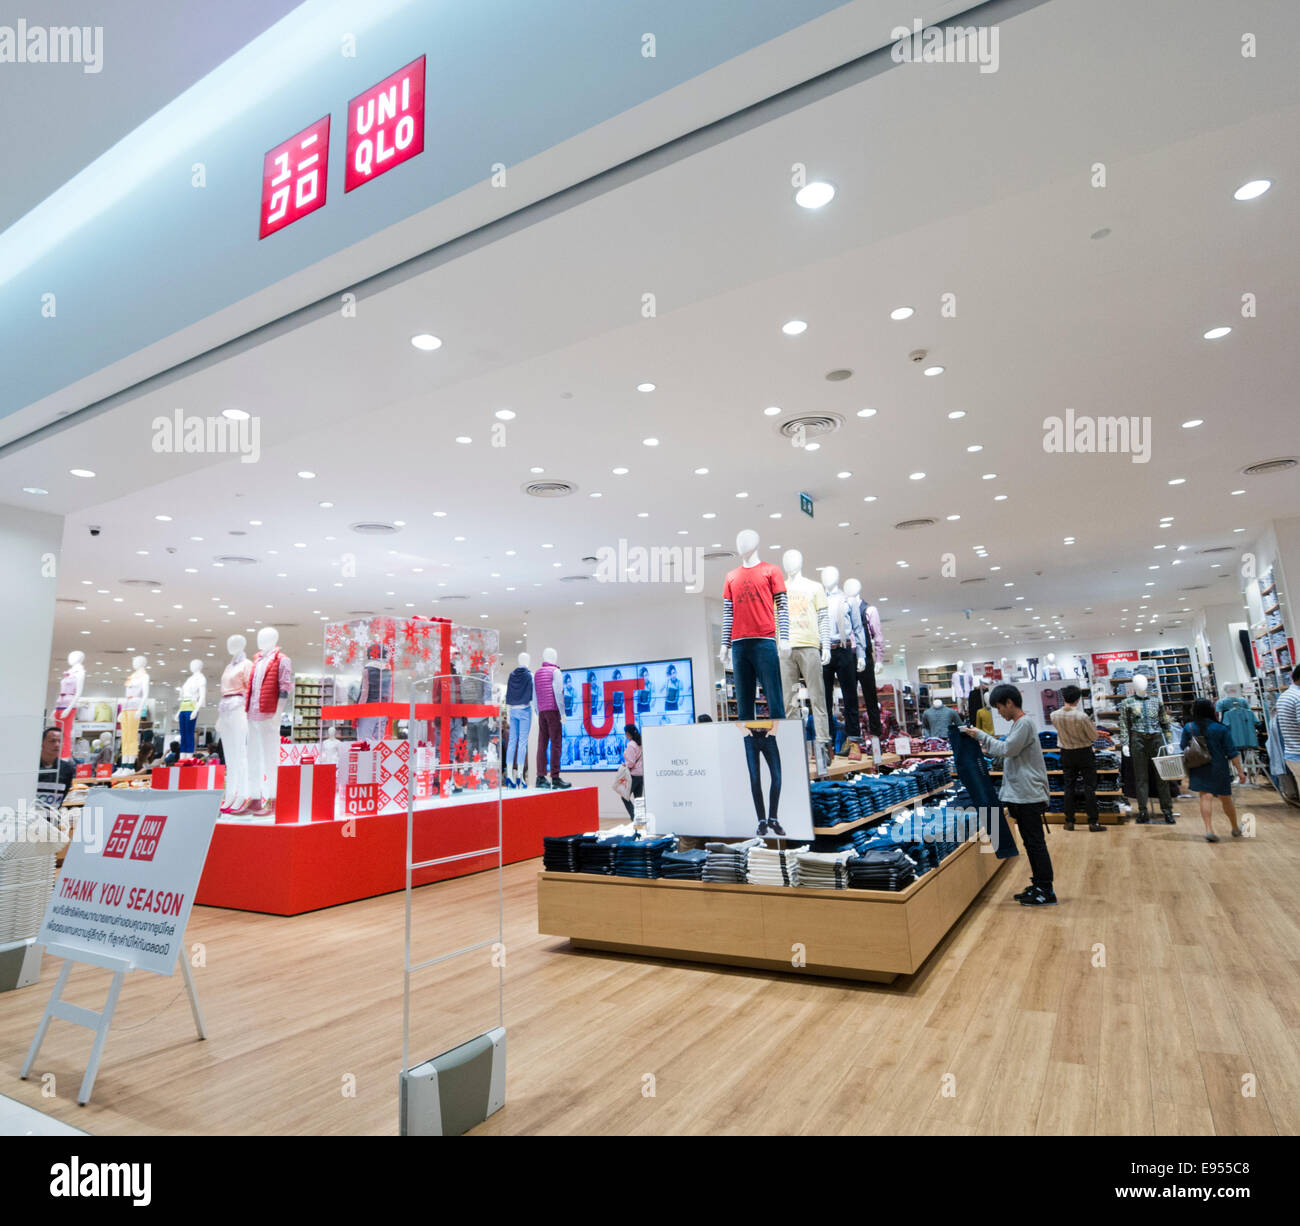 Uniqlo Store High Resolution Stock Photography and Images - Alamy